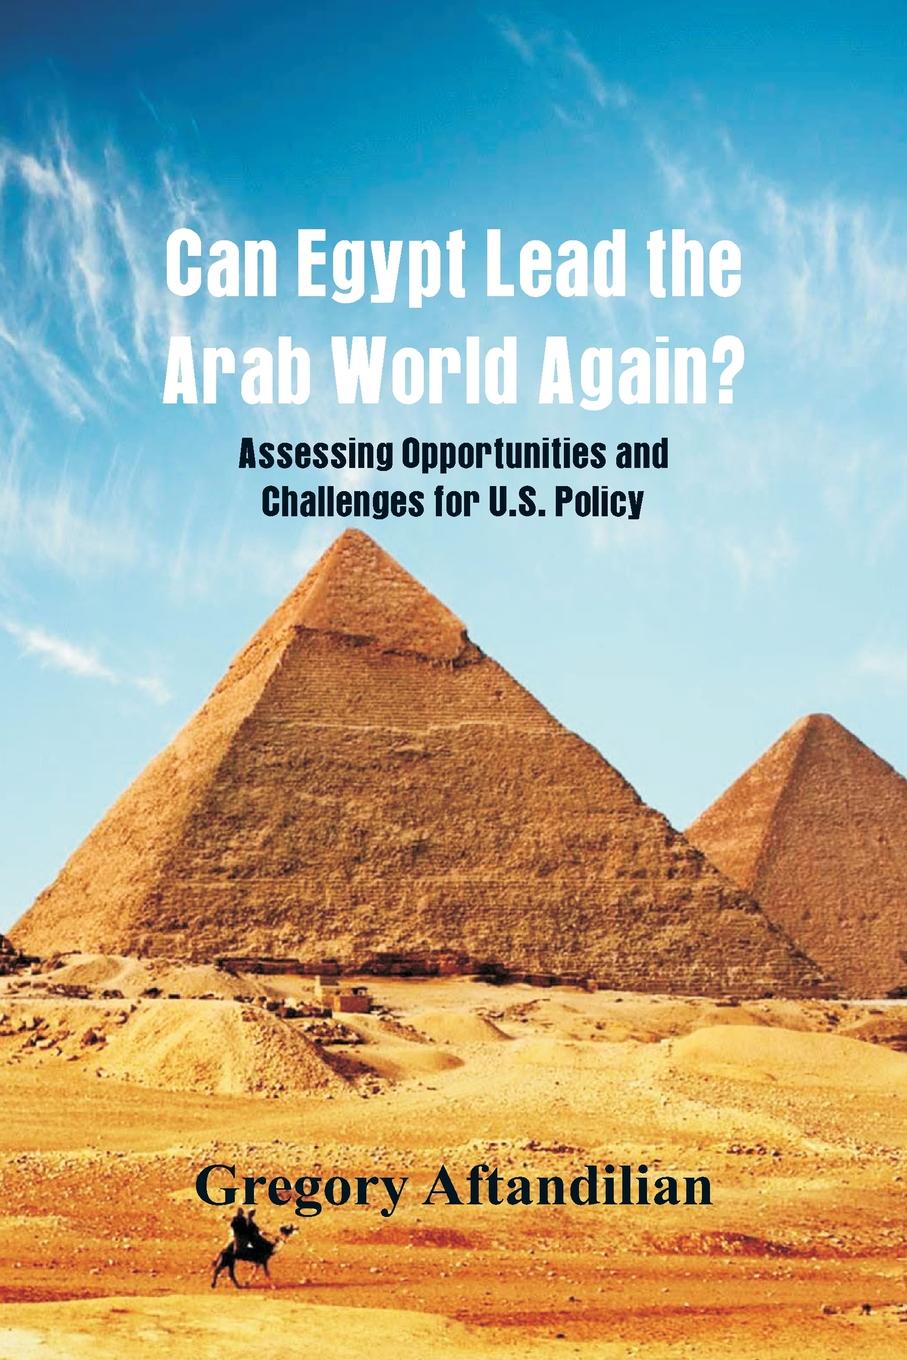 Can Egypt Lead the Arab World Again?. Assessing Opportunities and Challenges for U.S. Policy